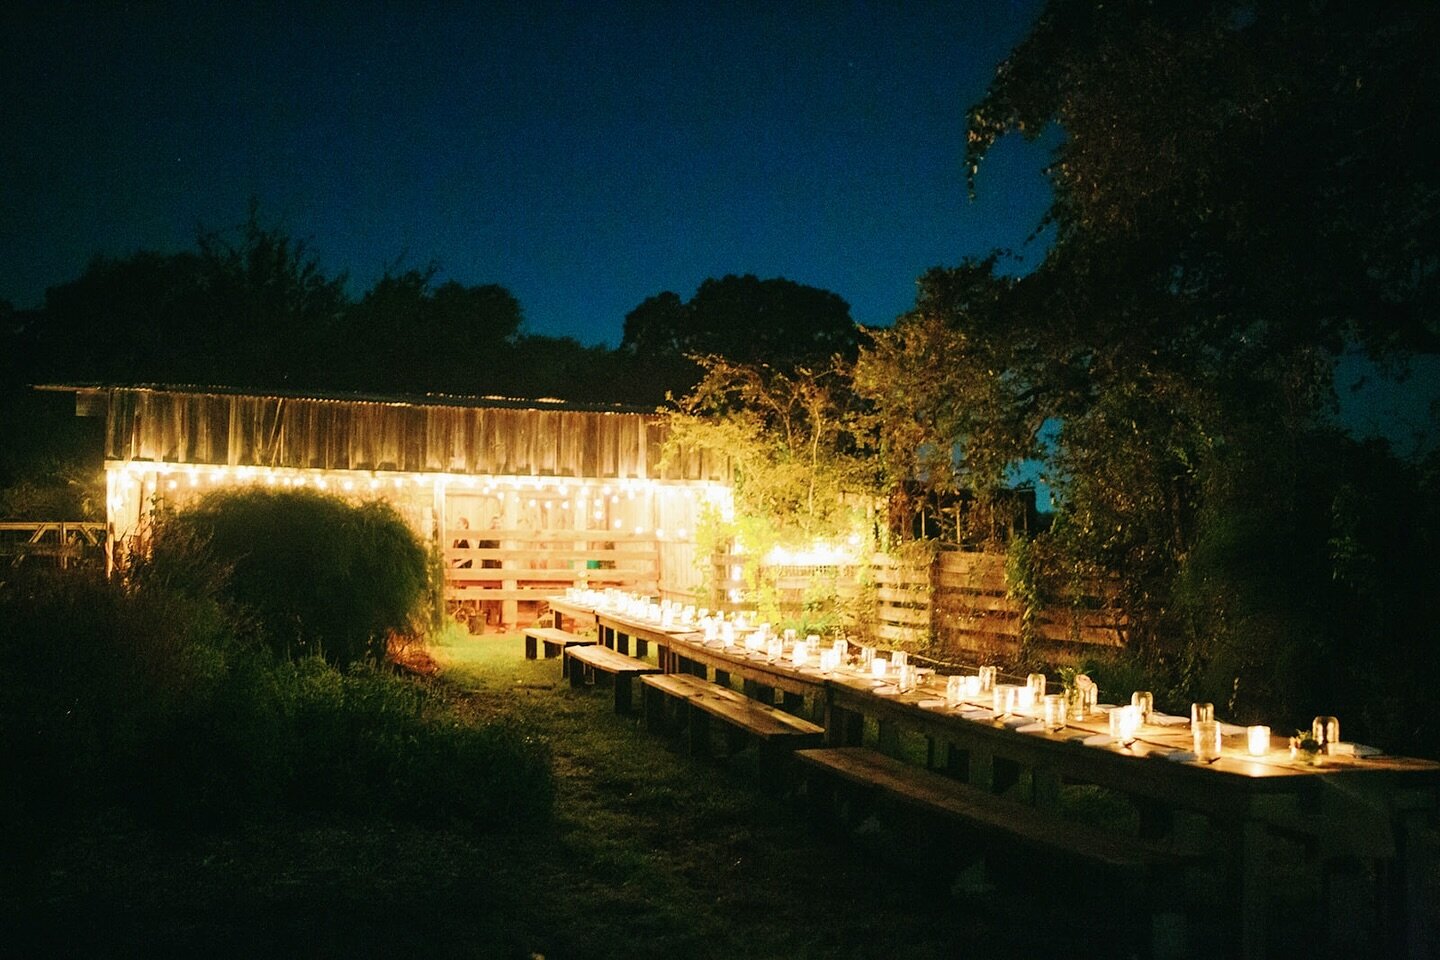 Candlelit dinners under the stars?! Yes please! This incredible venue is one of my favorites in Texas &mdash; Ronin Farm &amp; Restaurant in the Bryan-College Station area. I would looooove to return to Texas to photograph a gorgeous forest wedding h